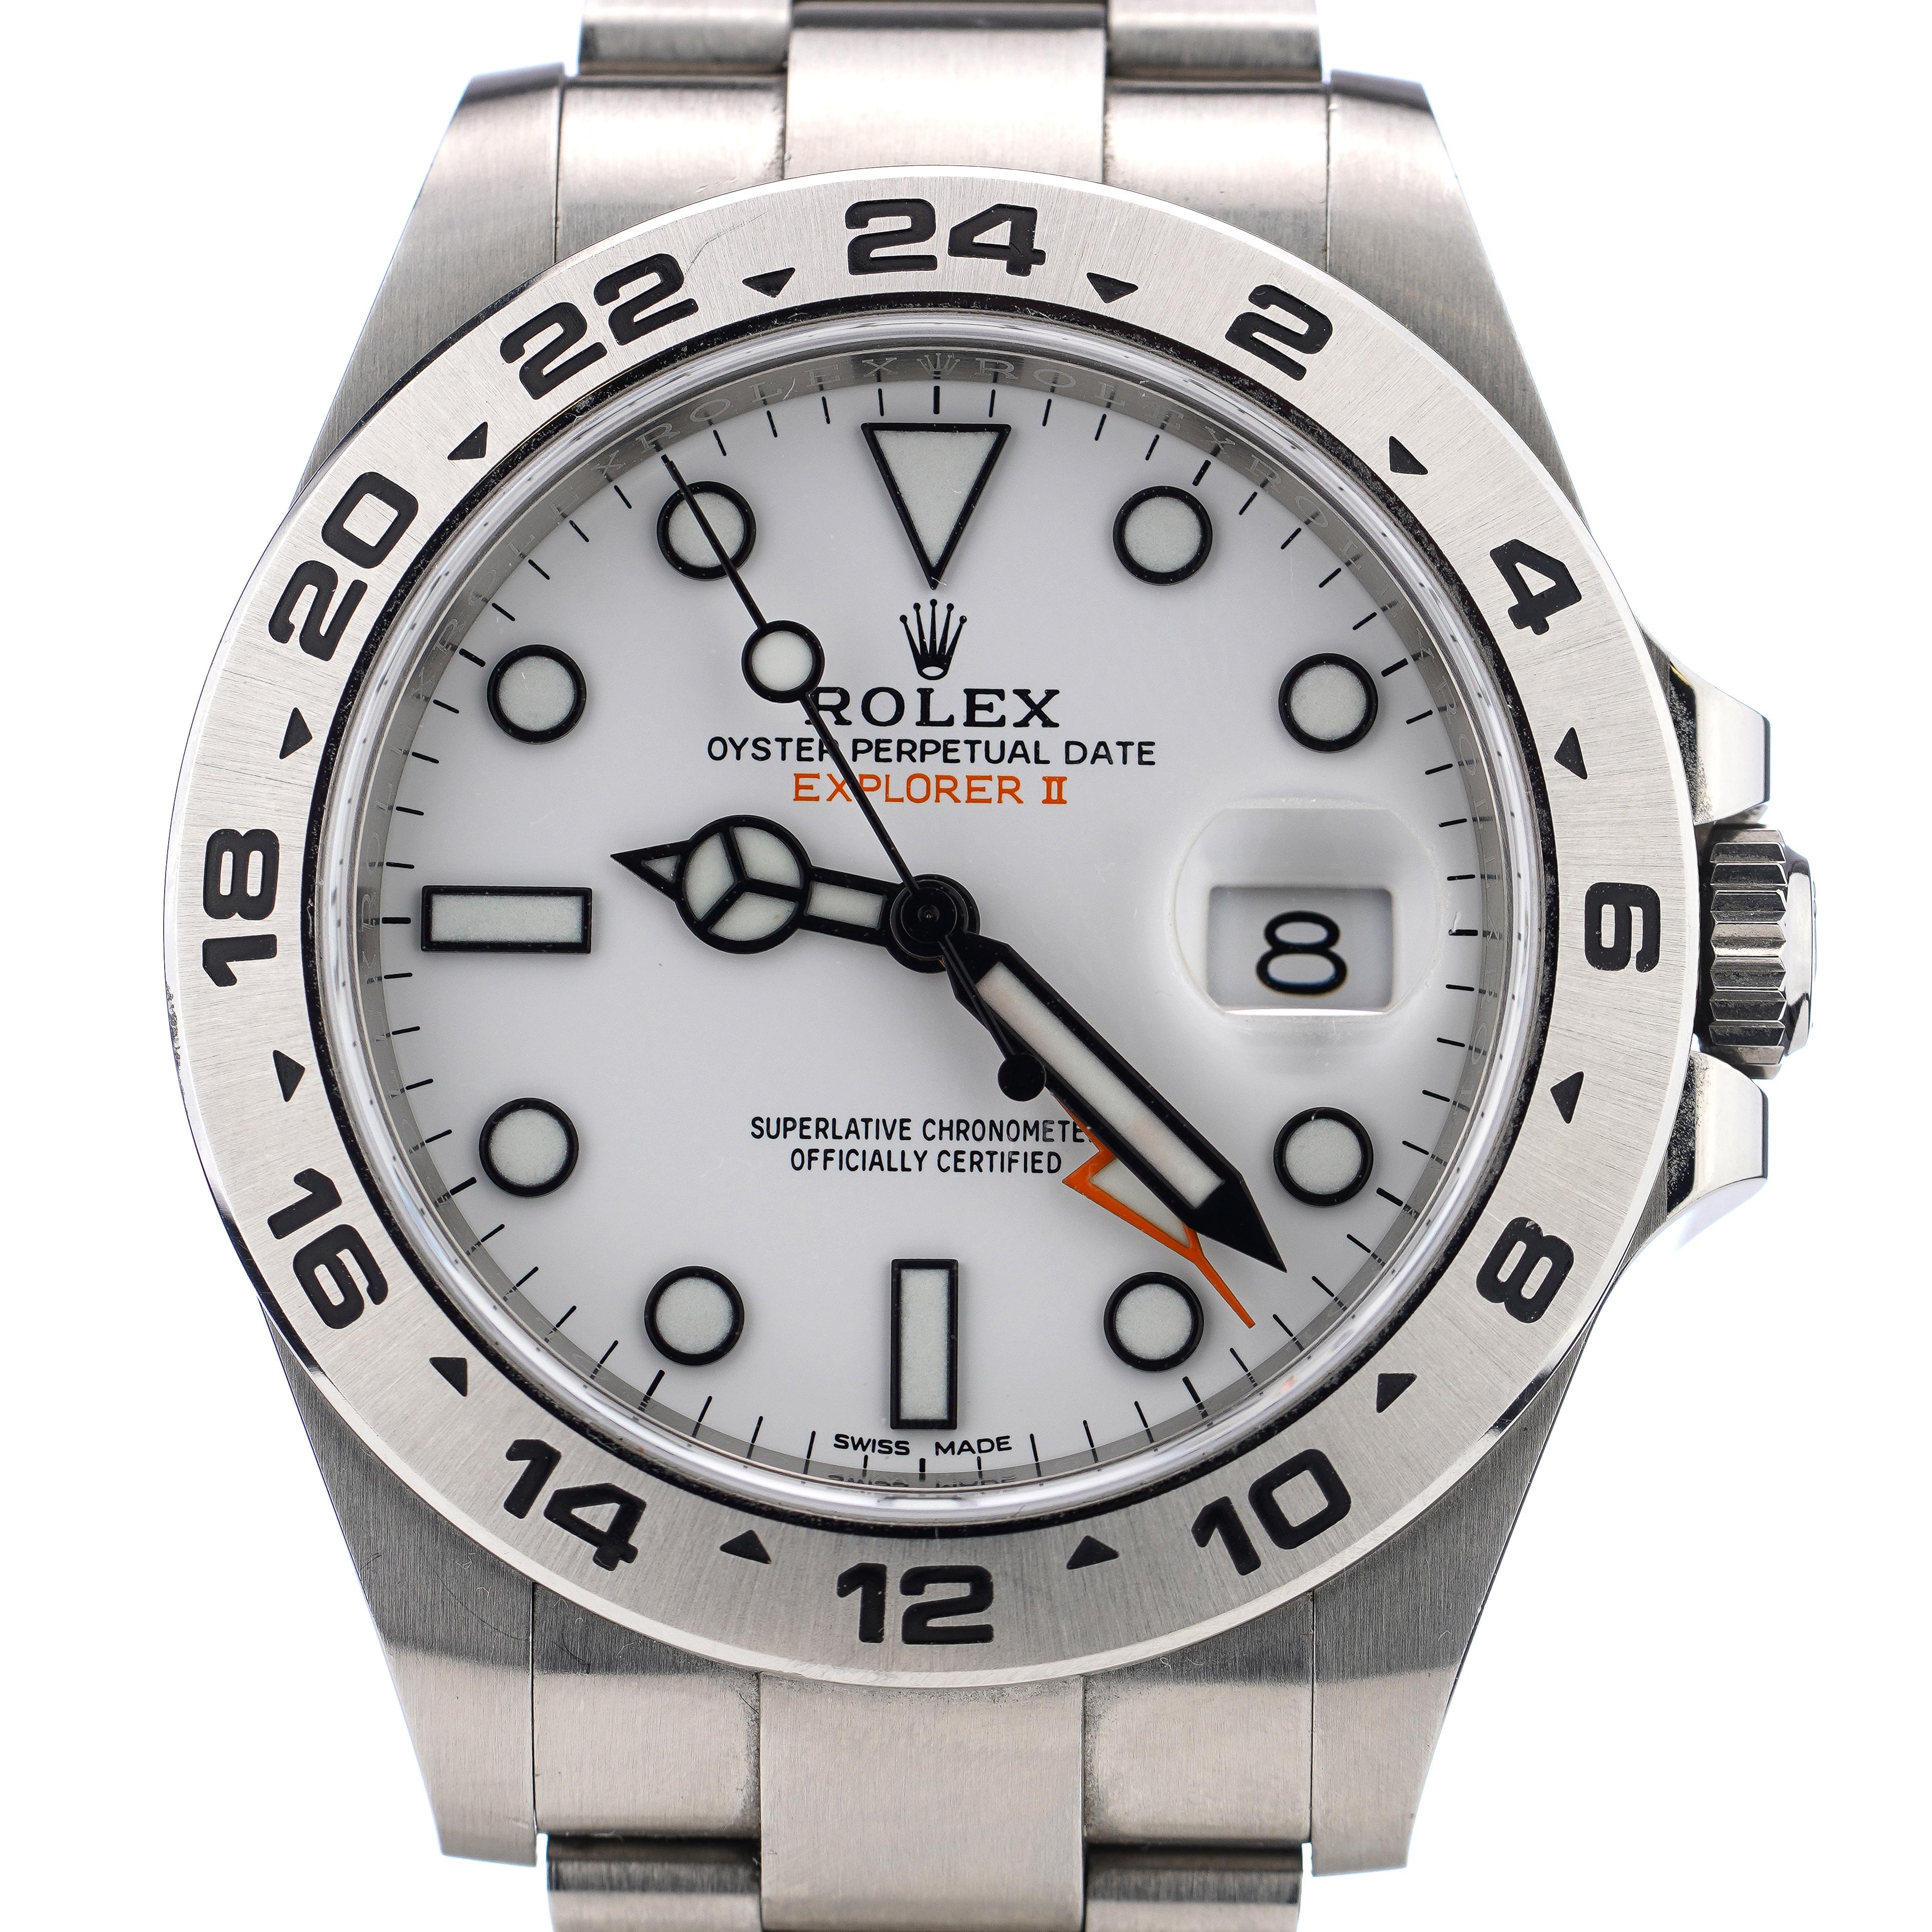 Rolex Oyster Perpetual Explorer II 216570 
Made in 2018, Purchase date 2019 

Case Diameter: 42 mm
Movement: Automatic
Model Nr. 216570 
Watchband Material: Stainless Steel
Case Material: Stainless 
Dial: White 
Display Type: Analogue
Glass: